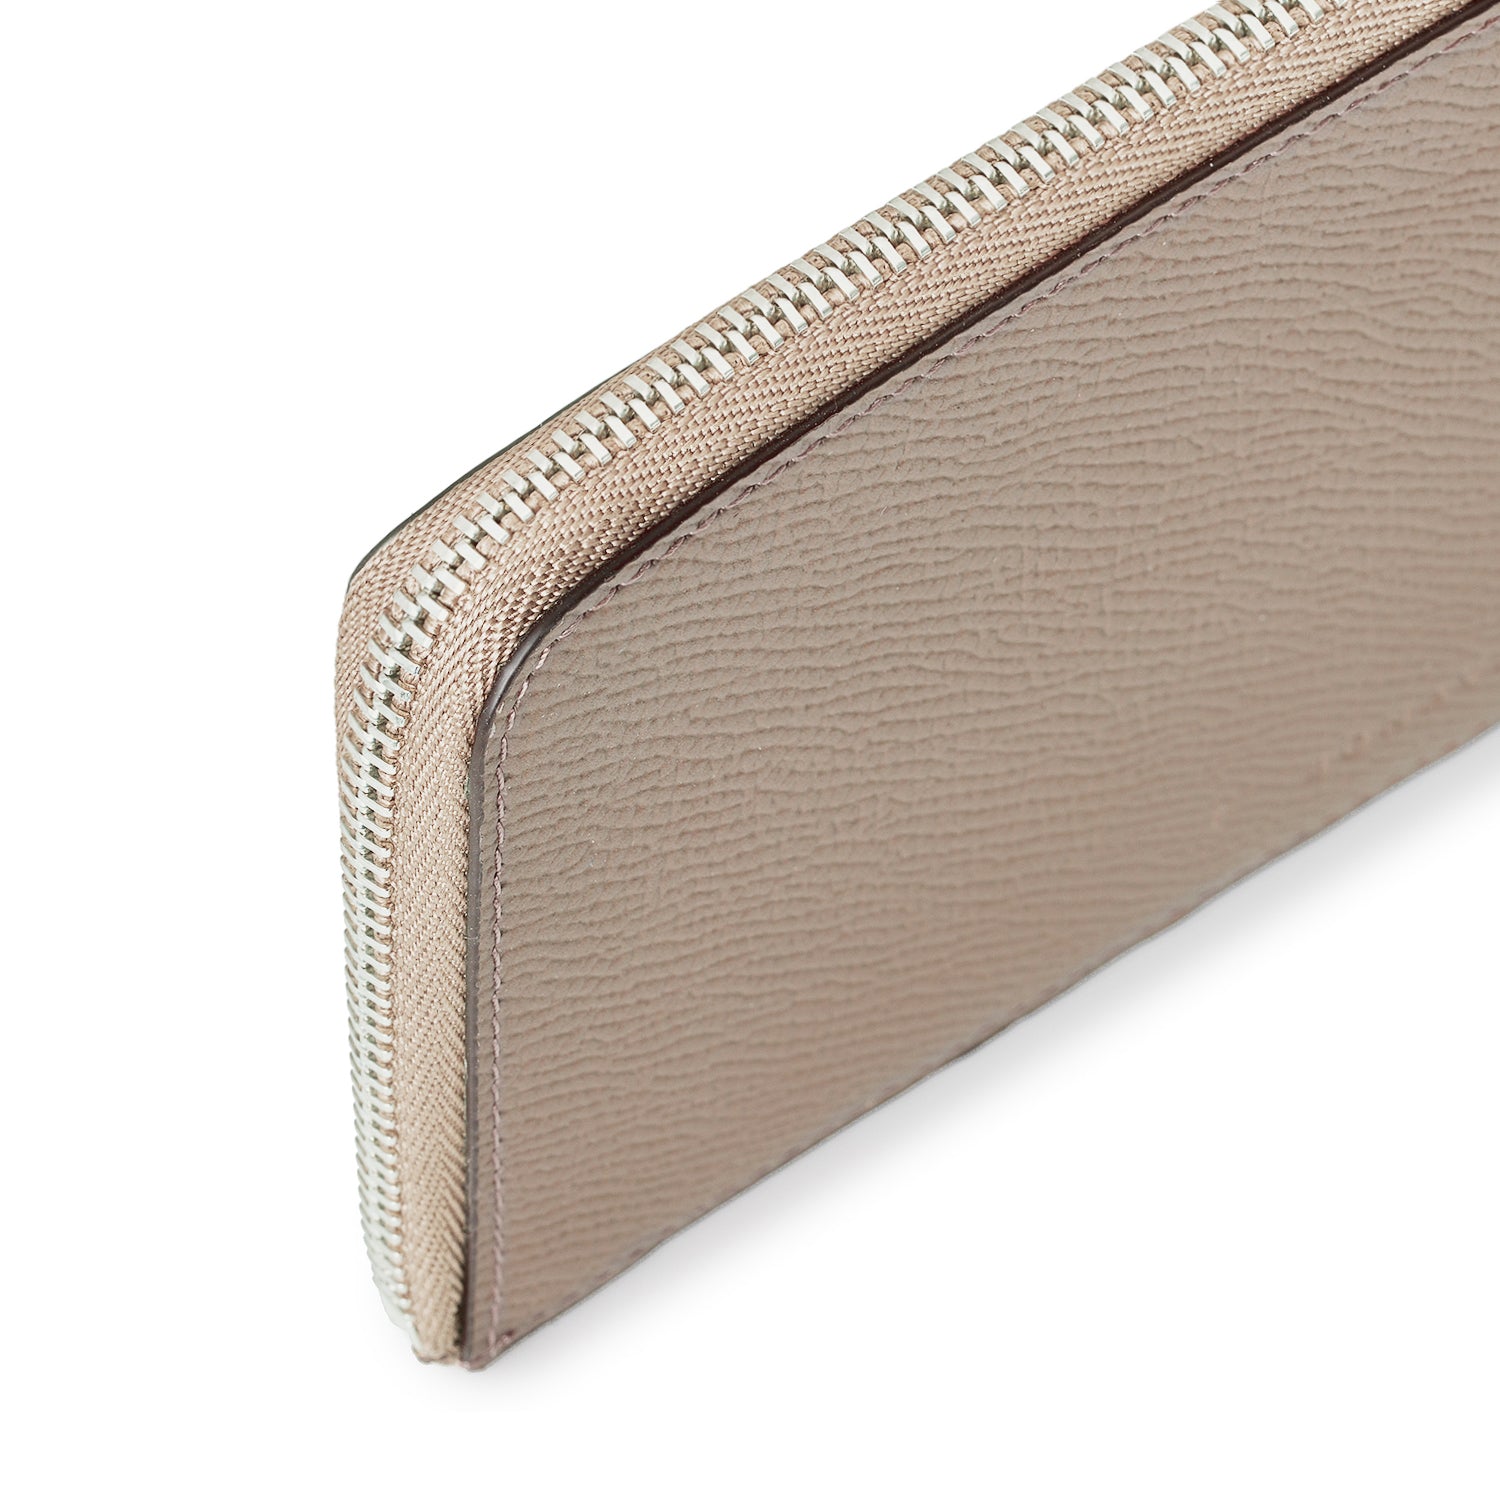 Long L-shaped zip wallet in Noblesse and embossed crocodile leather